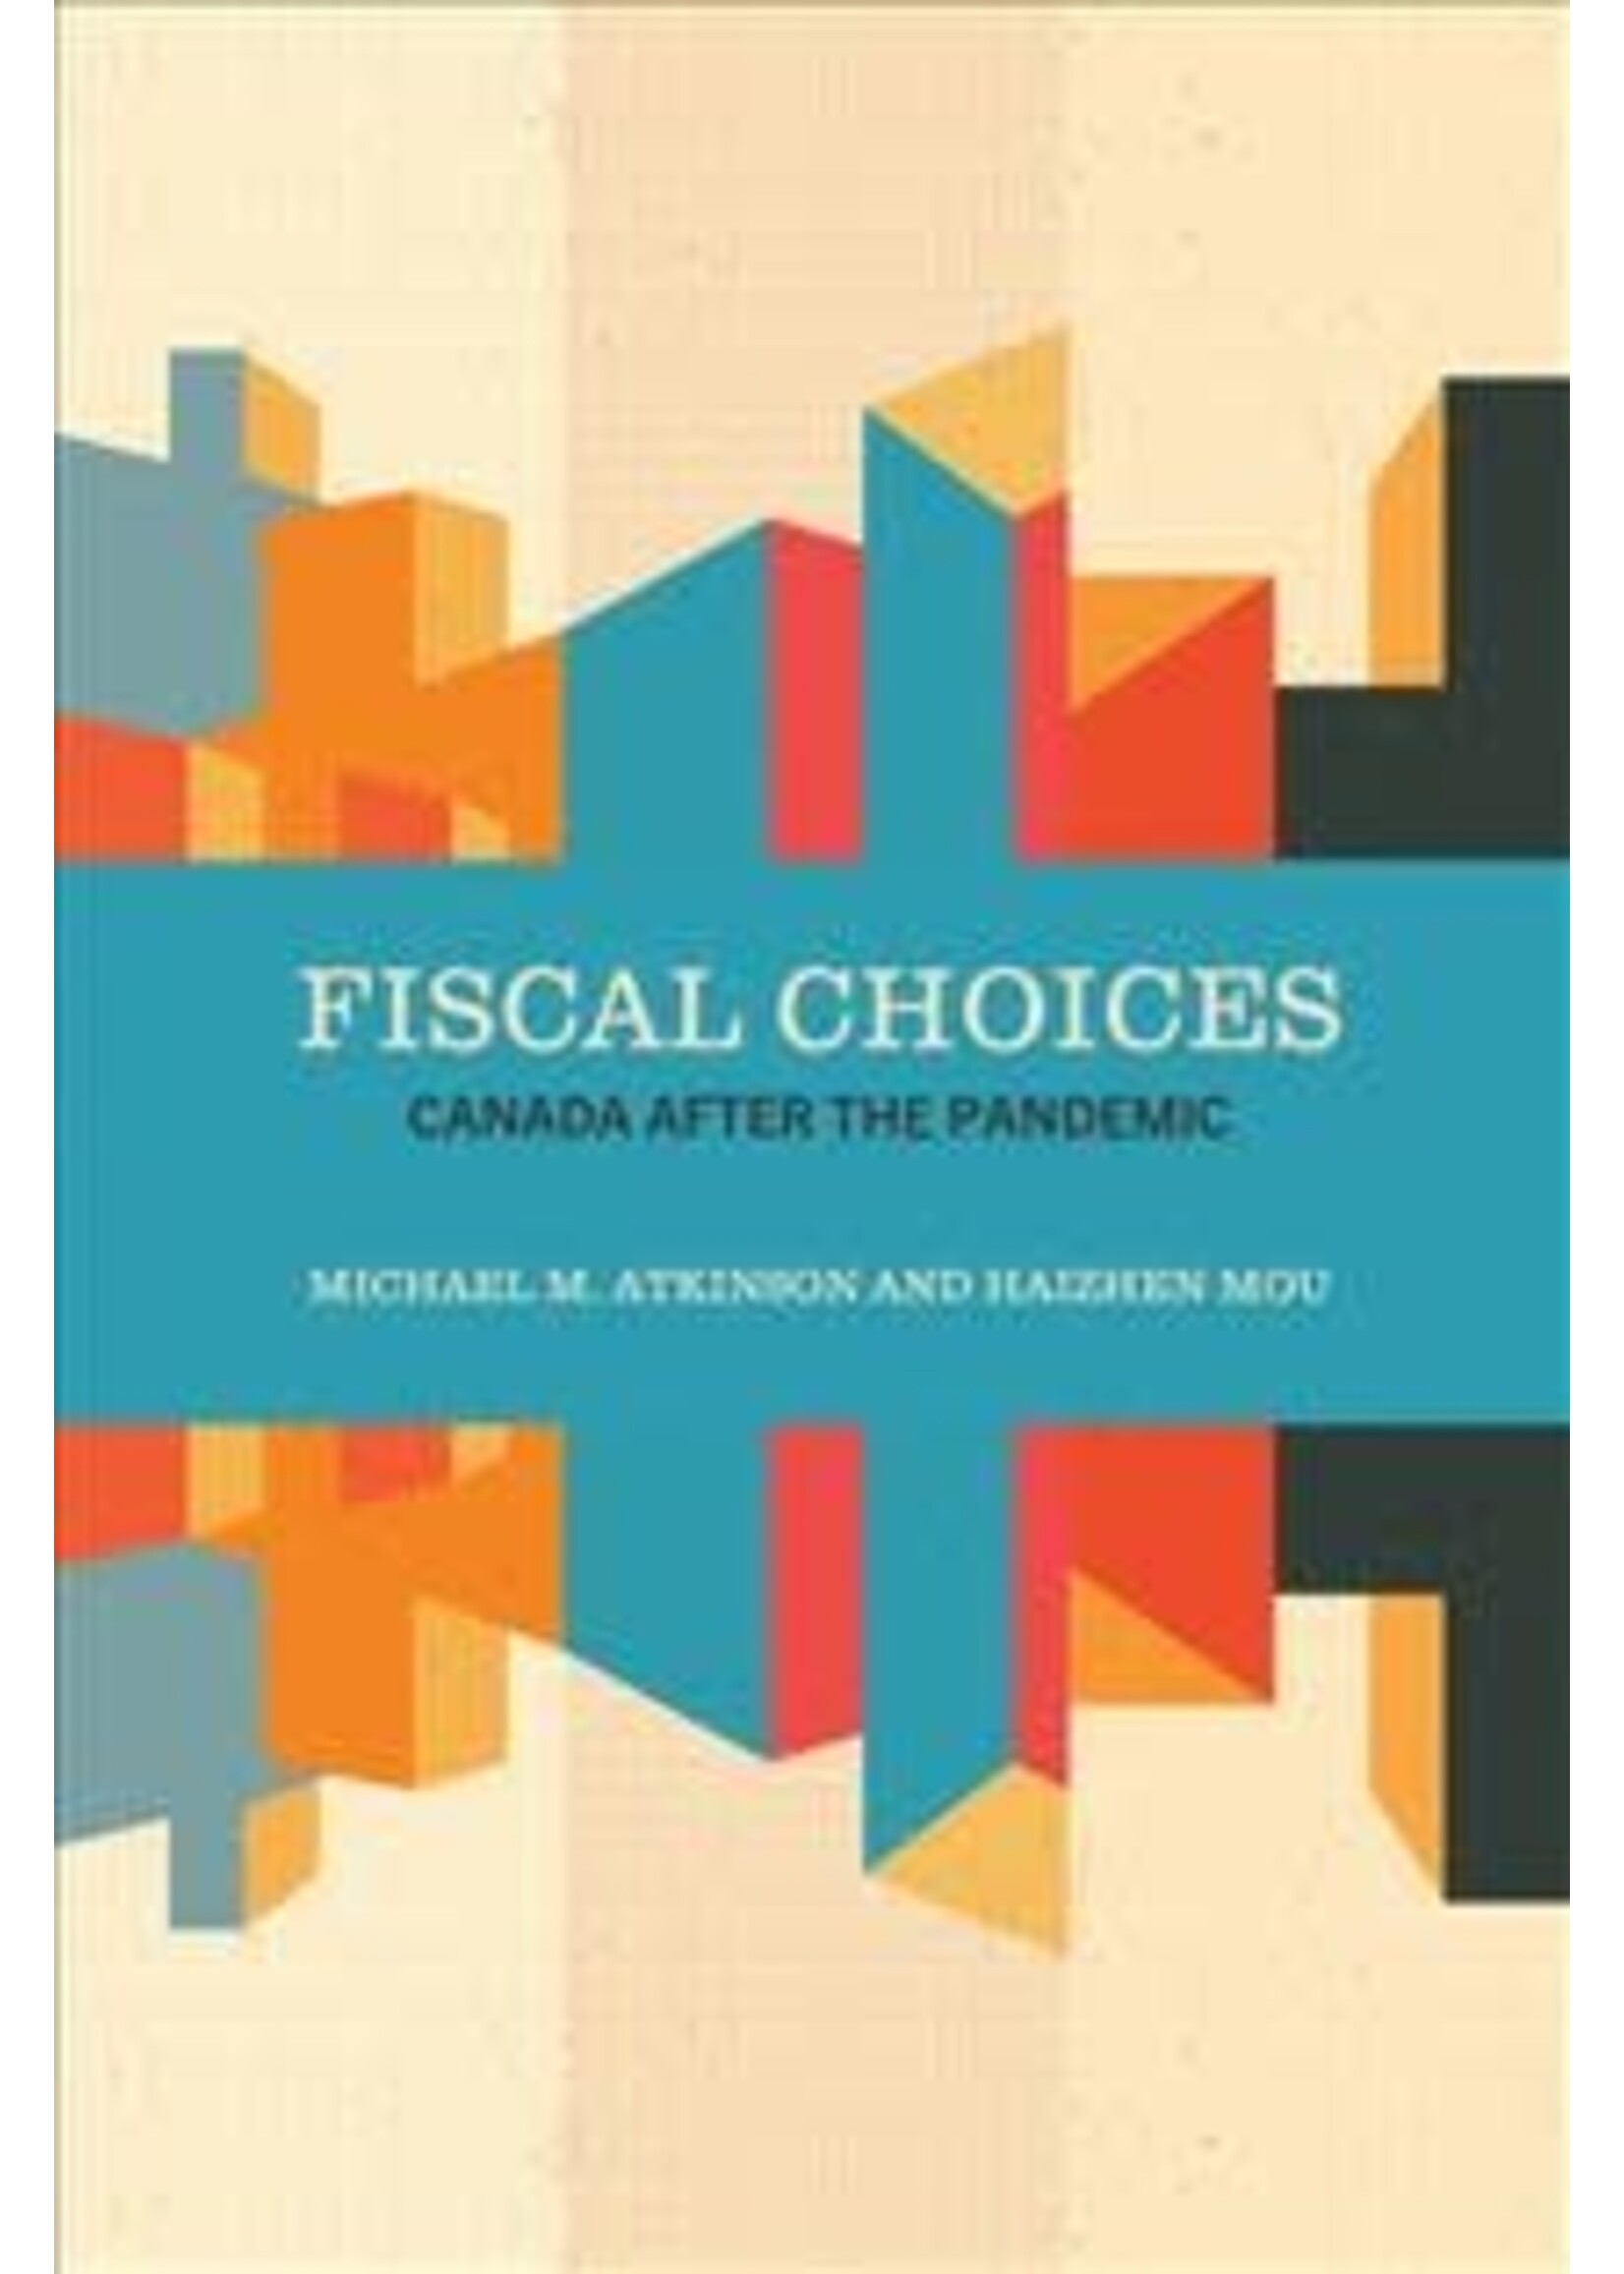 Fiscal Choices: Canada after the Pandemic by Michael M. Atkinson, Haizhen Mou